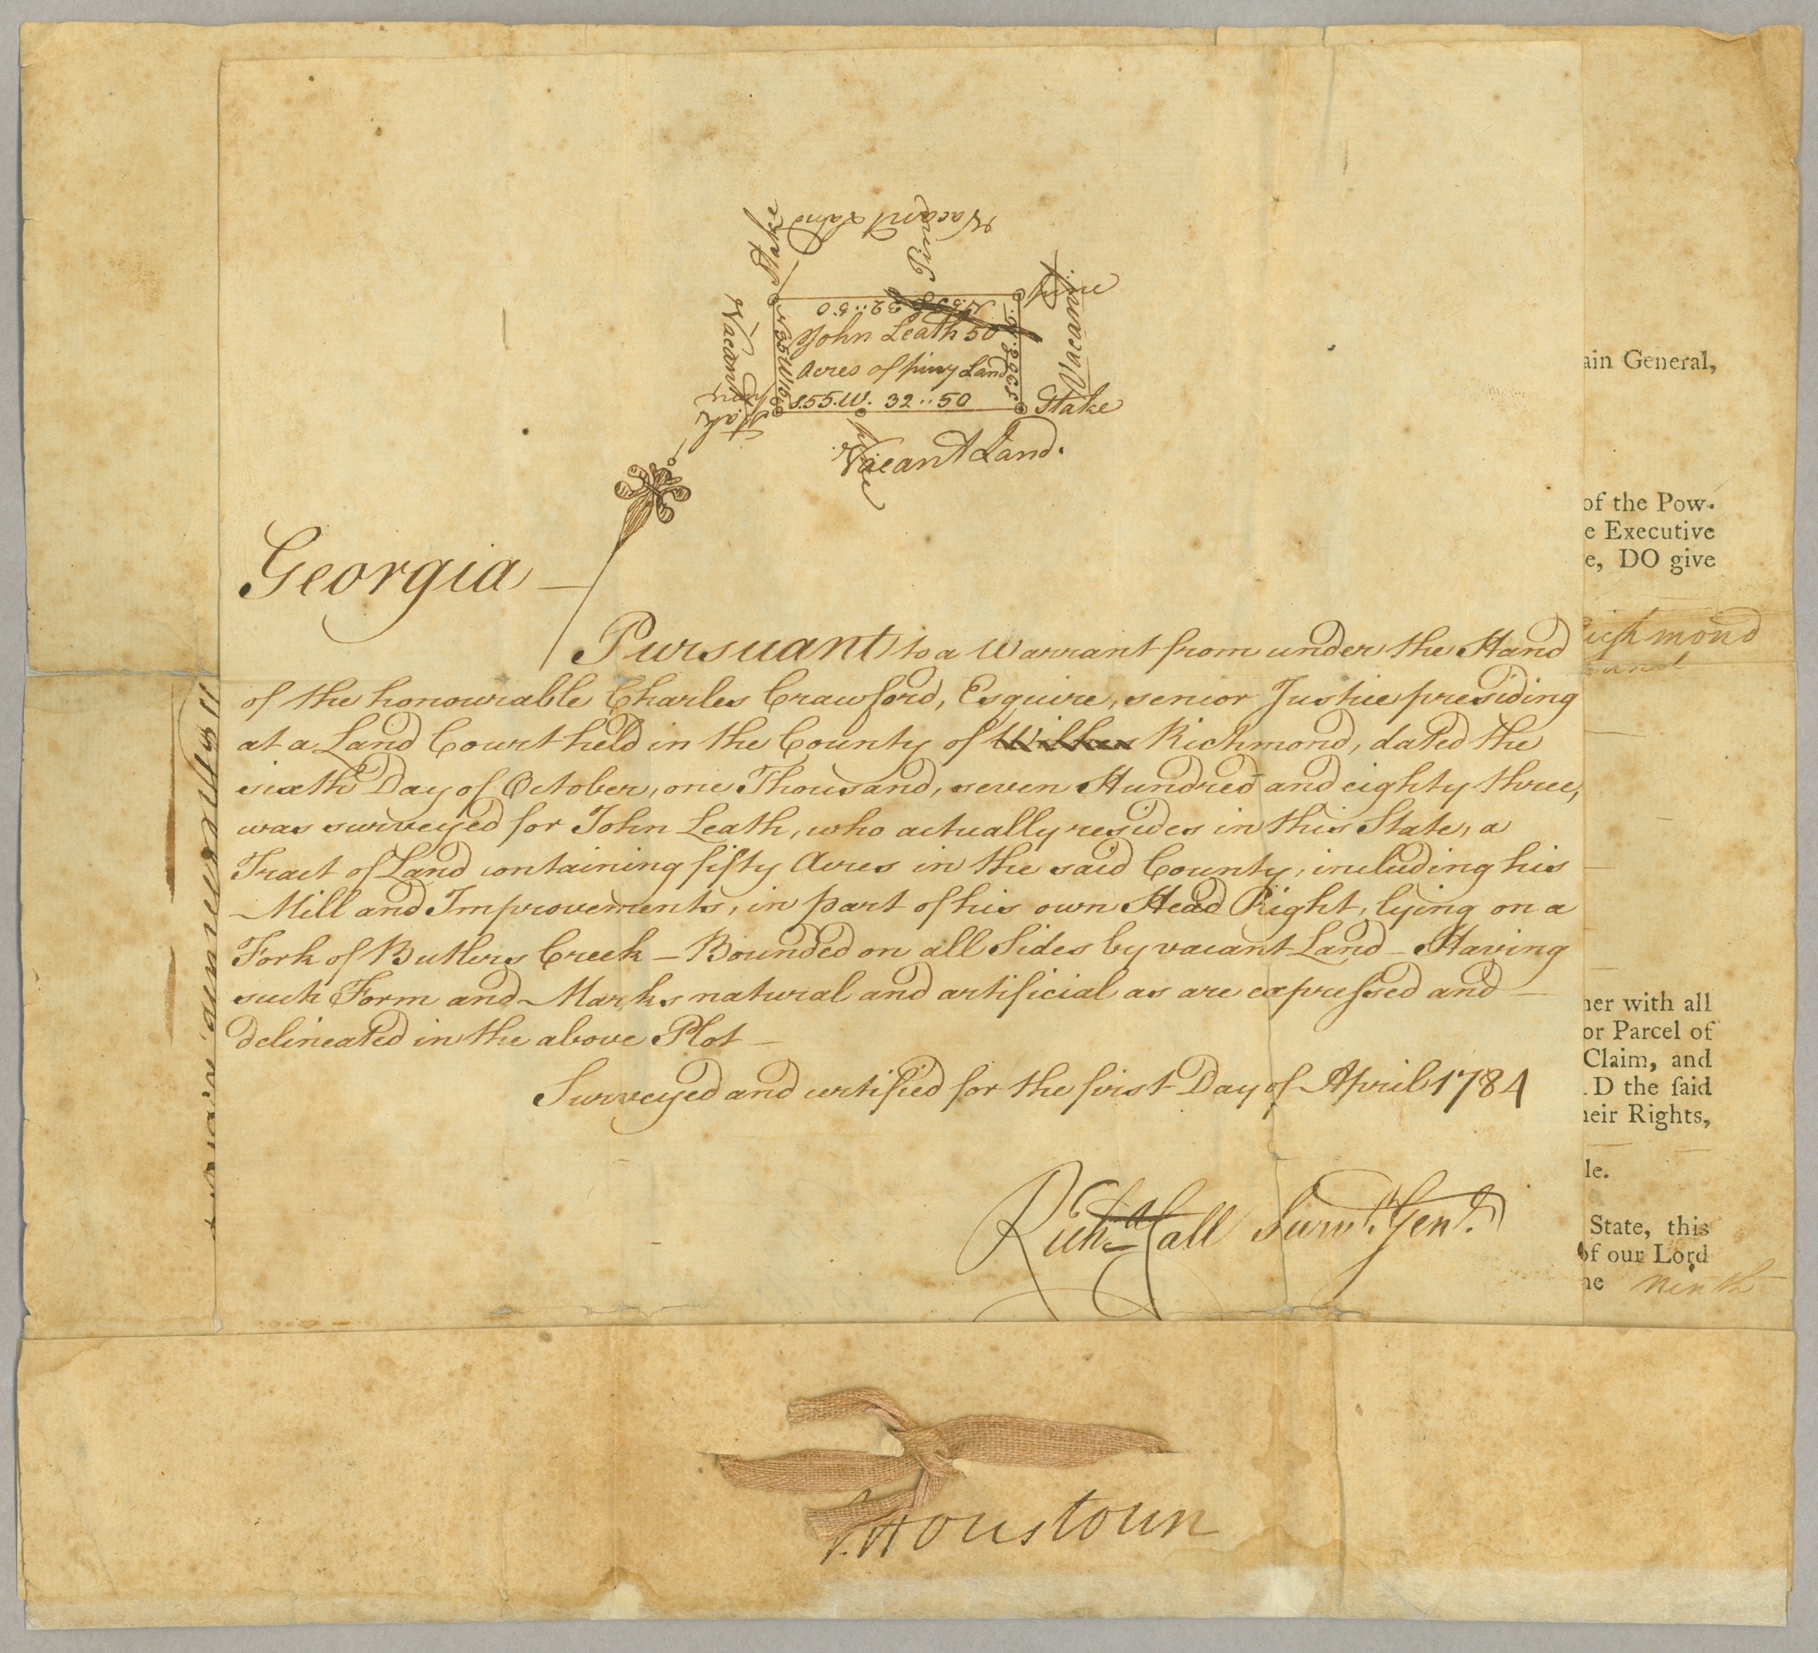 Land record, Grant with attached plat, from the state of Georgia to John Leath, granting Leath 50 acres in Richmond Count, Leaf 1